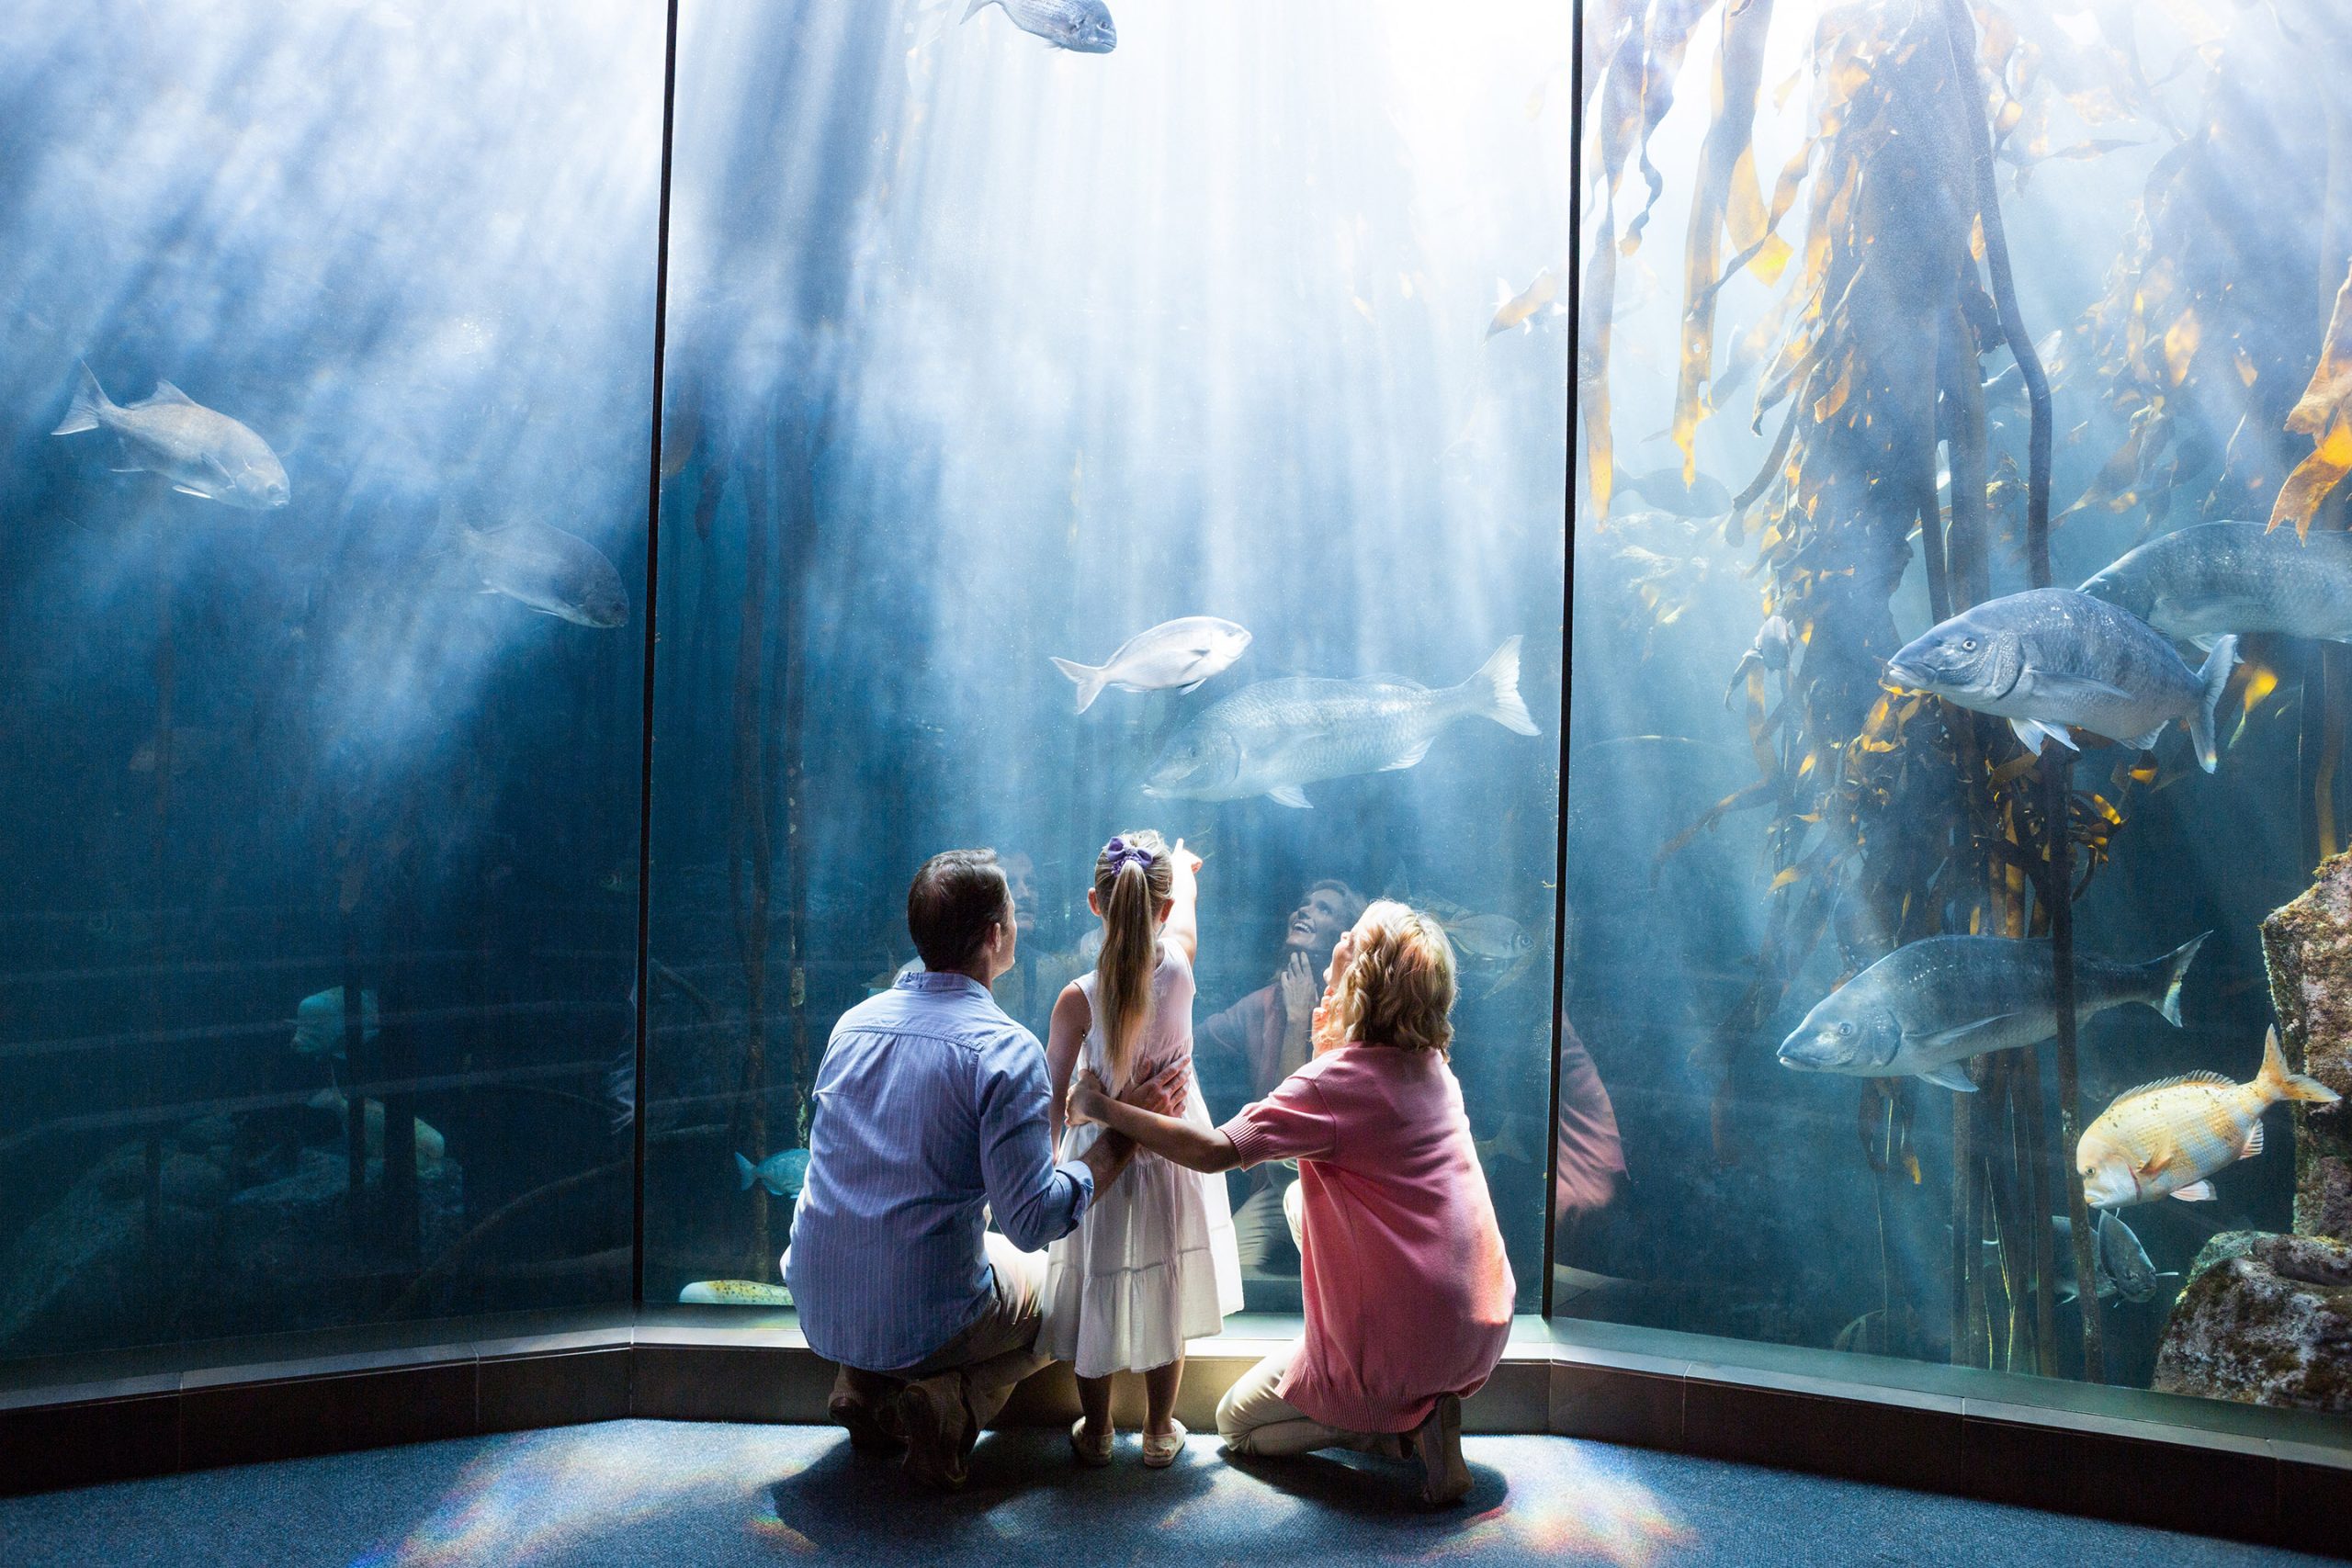 A family viewing fish at the Two Oceans Aquarium